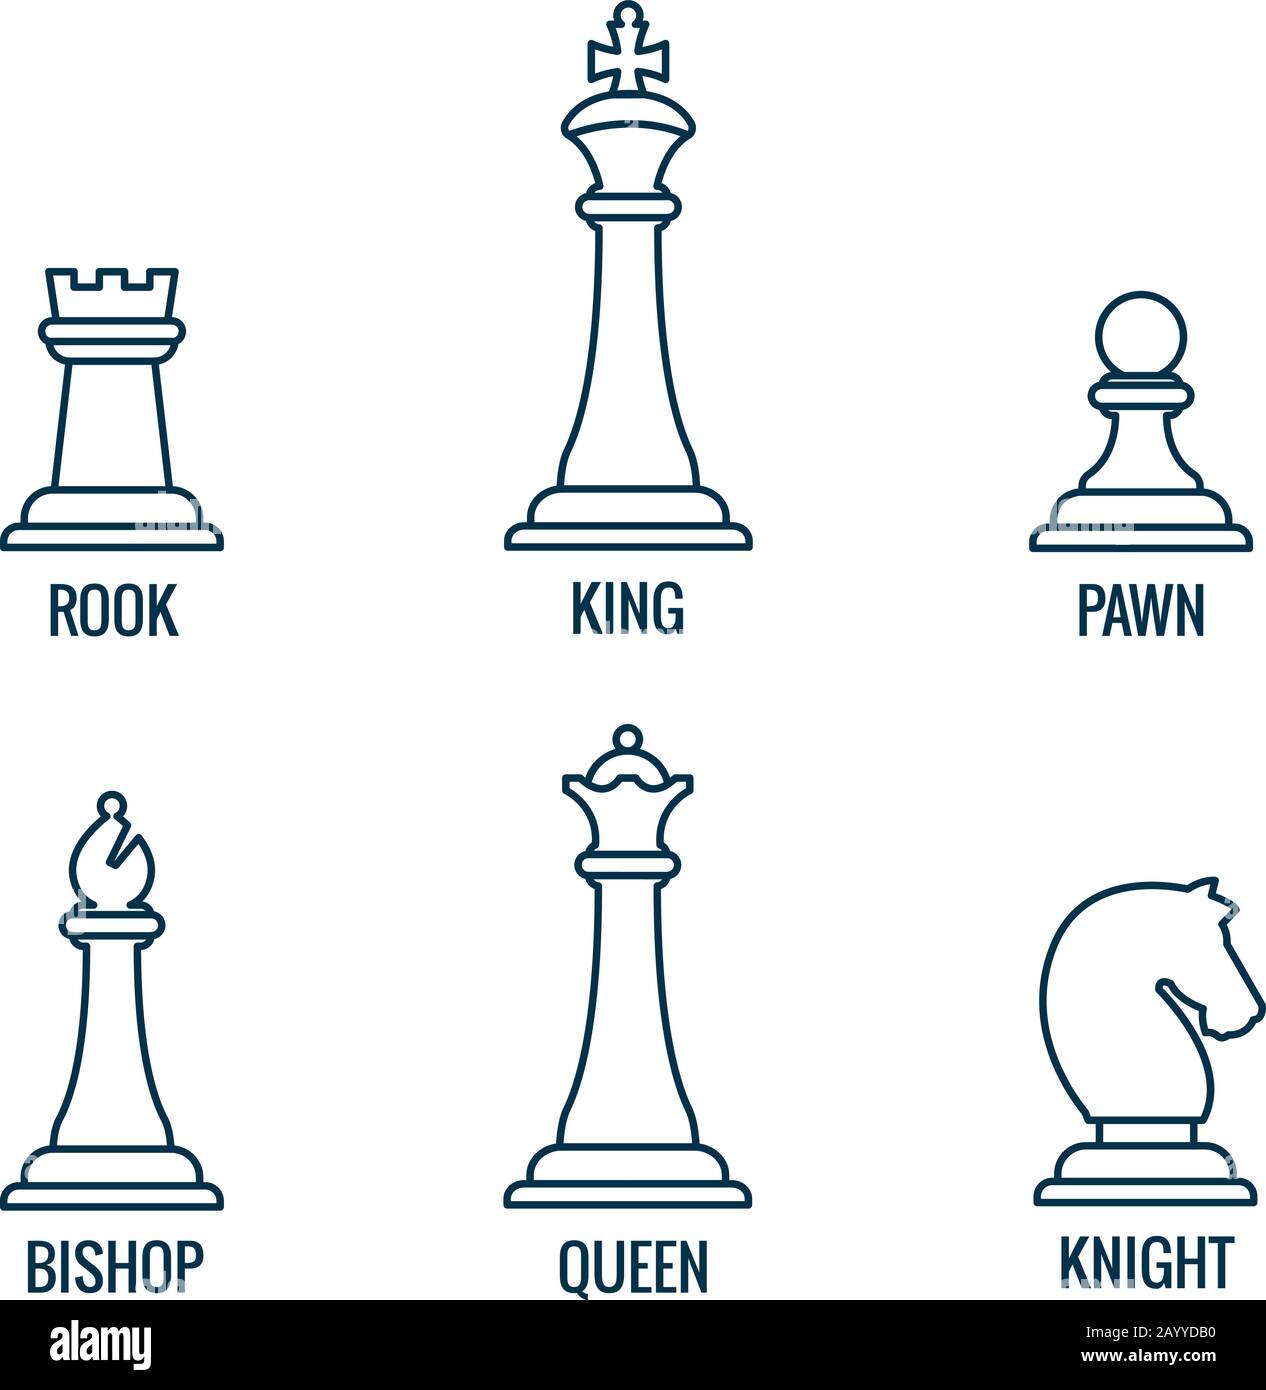 Chess Piece PNG - King Chess Piece, Bishop Chess Piece, Knight Chess Piece,  Chess Piece Drawing, Rook Chess Piece, King And Queen Chess Pieces  Drawings, Chess Piece Relative Value, Chess Piece Outline. 